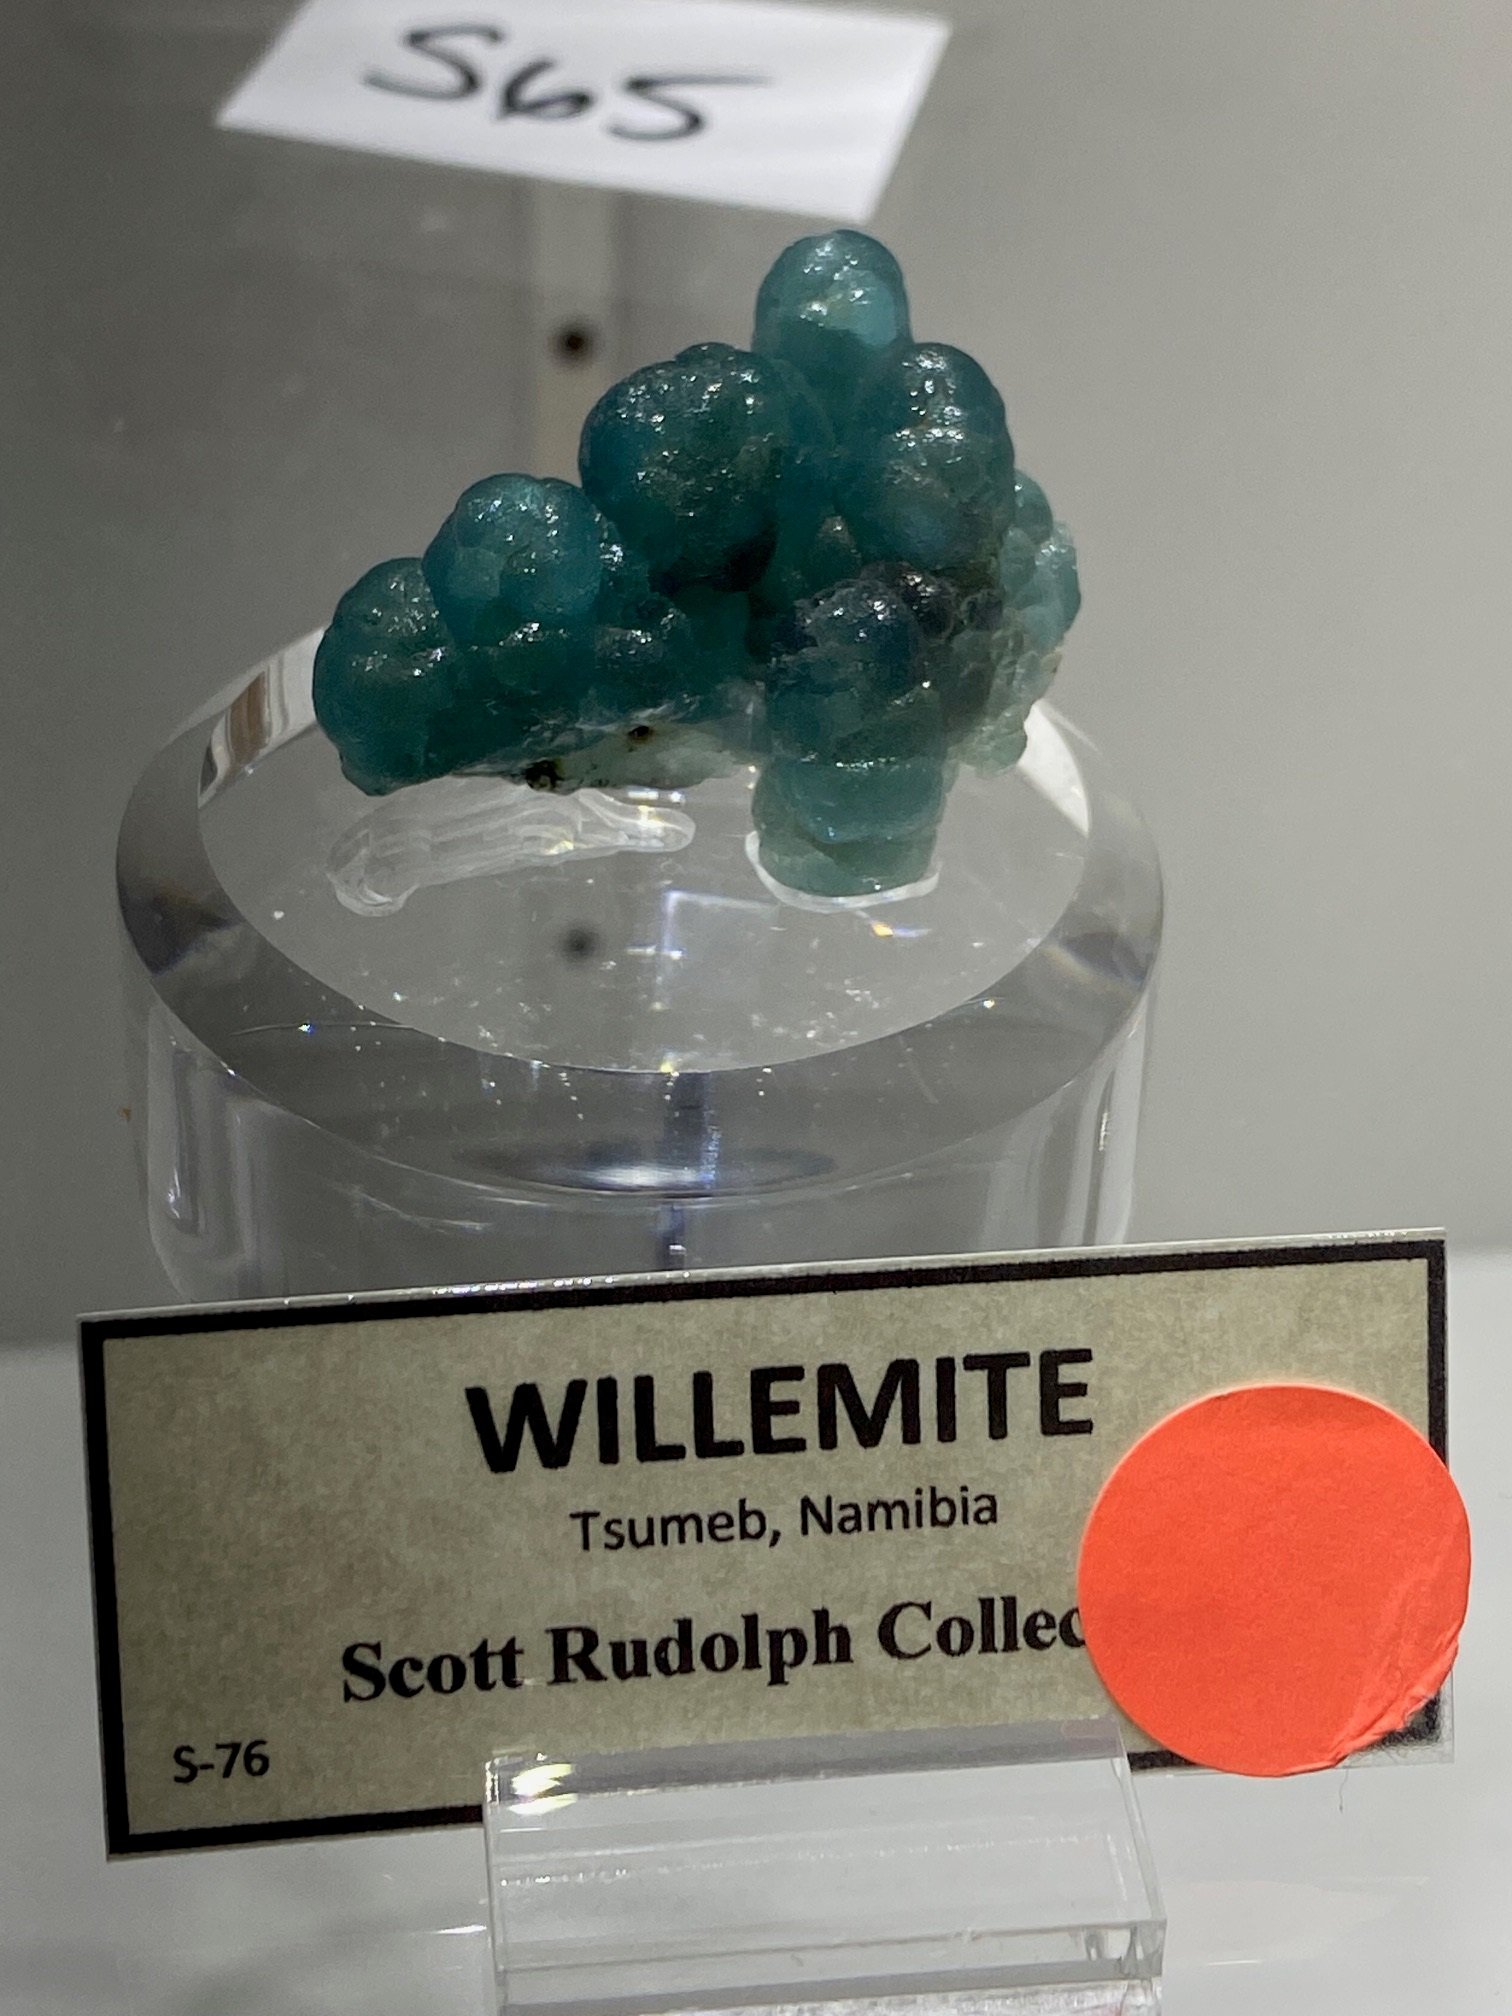 Juicy Willemite at Rudolph